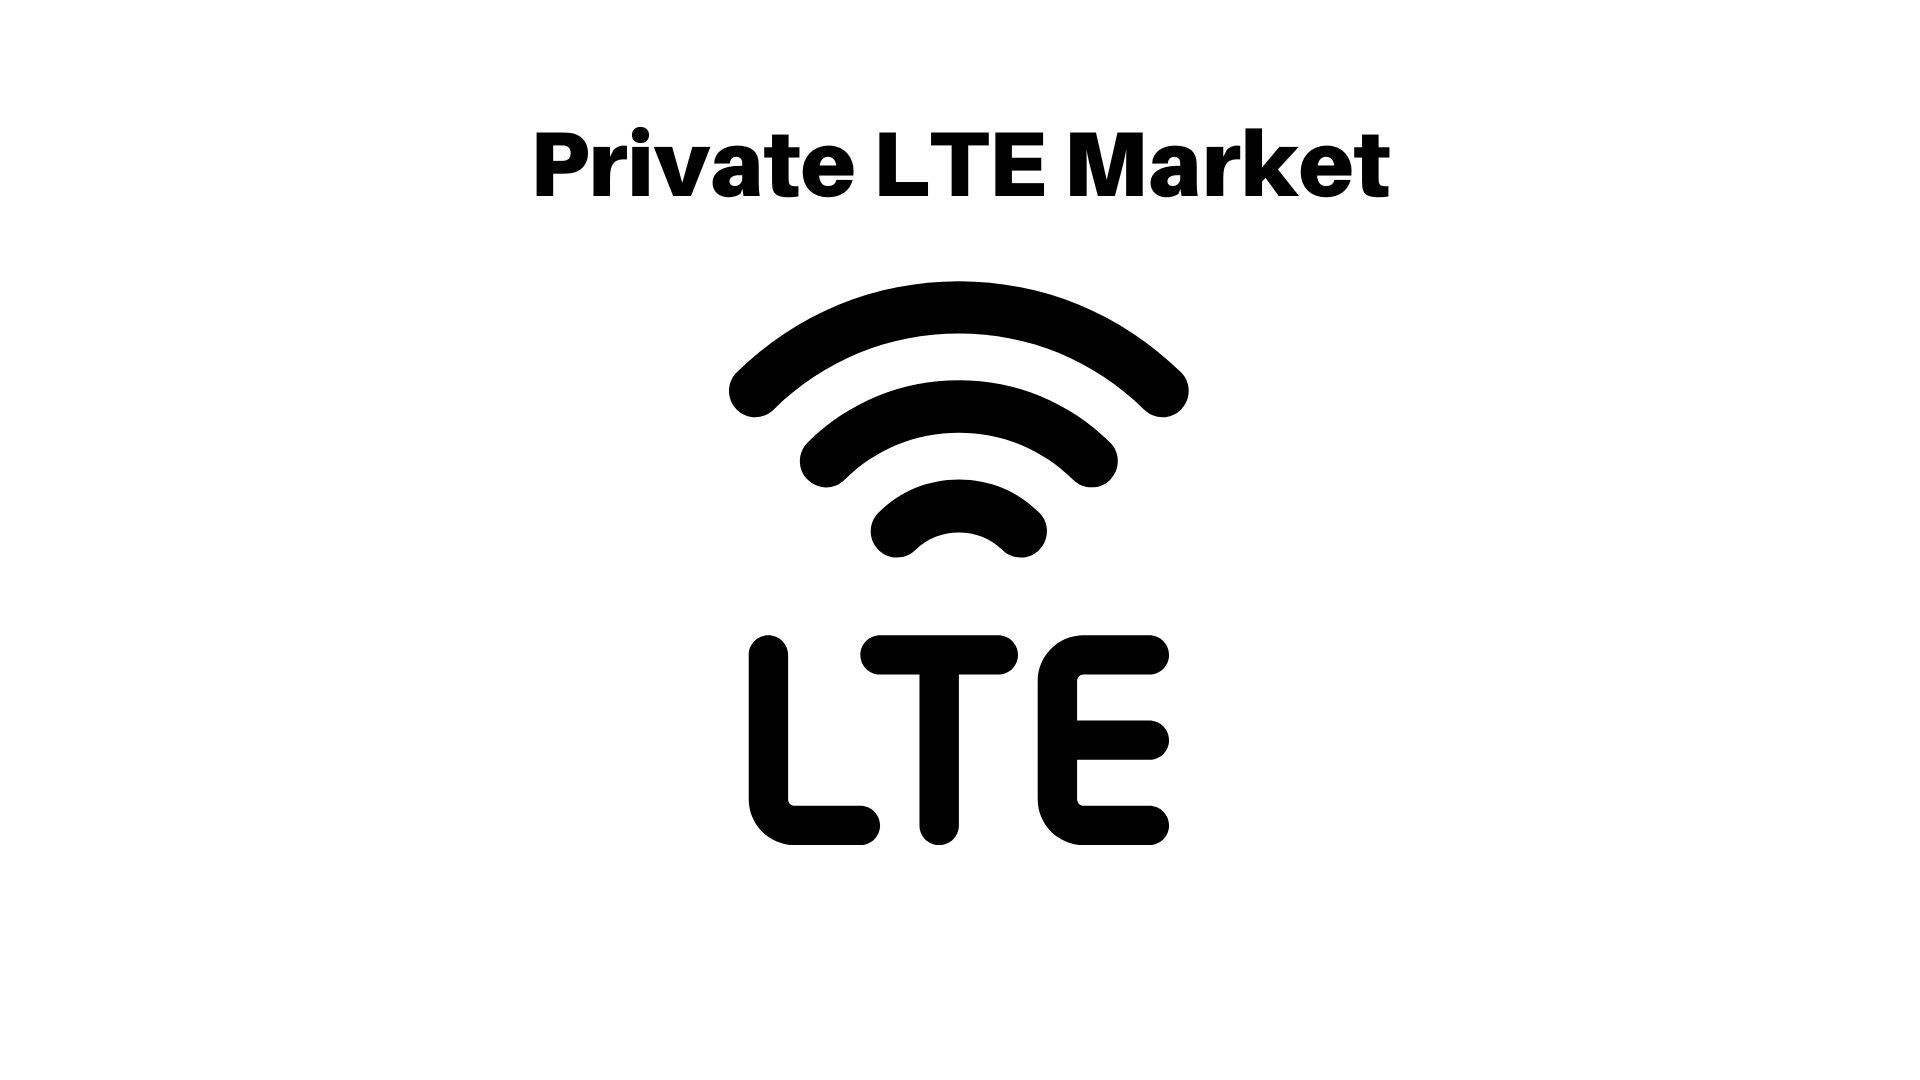 Global Private LTE Market Report Offers In-Depth Analysis +Growth Rate 18.9% by 2032